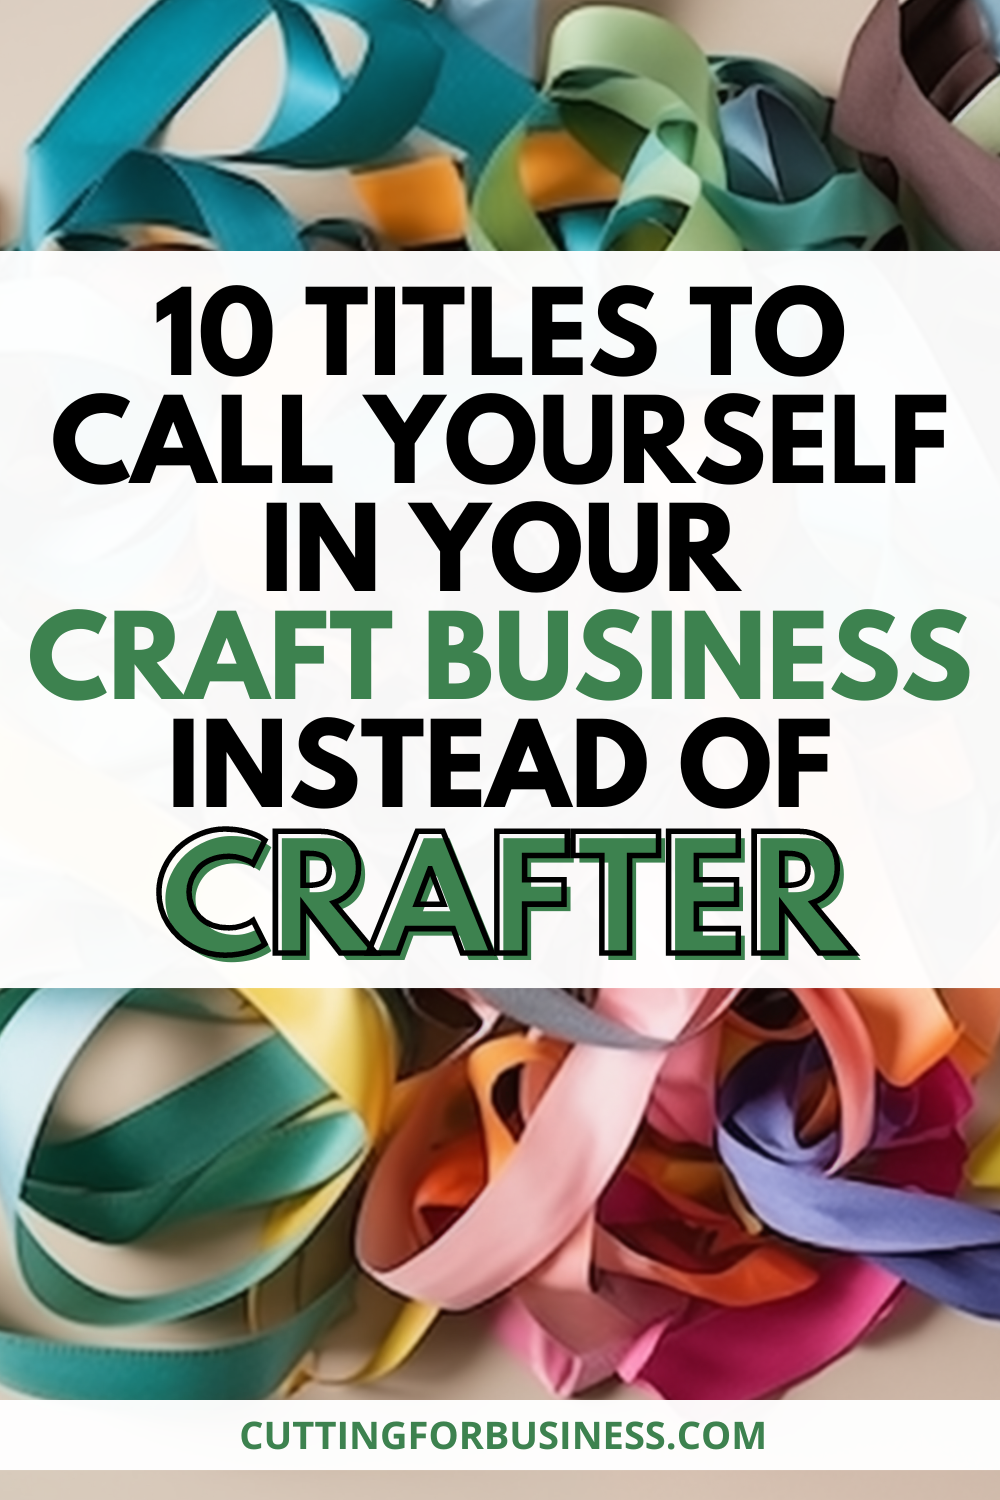 10 Titles to Call Yourself in Your Craft Business Instead of 'Crafter' - cuttingforbusiness.com